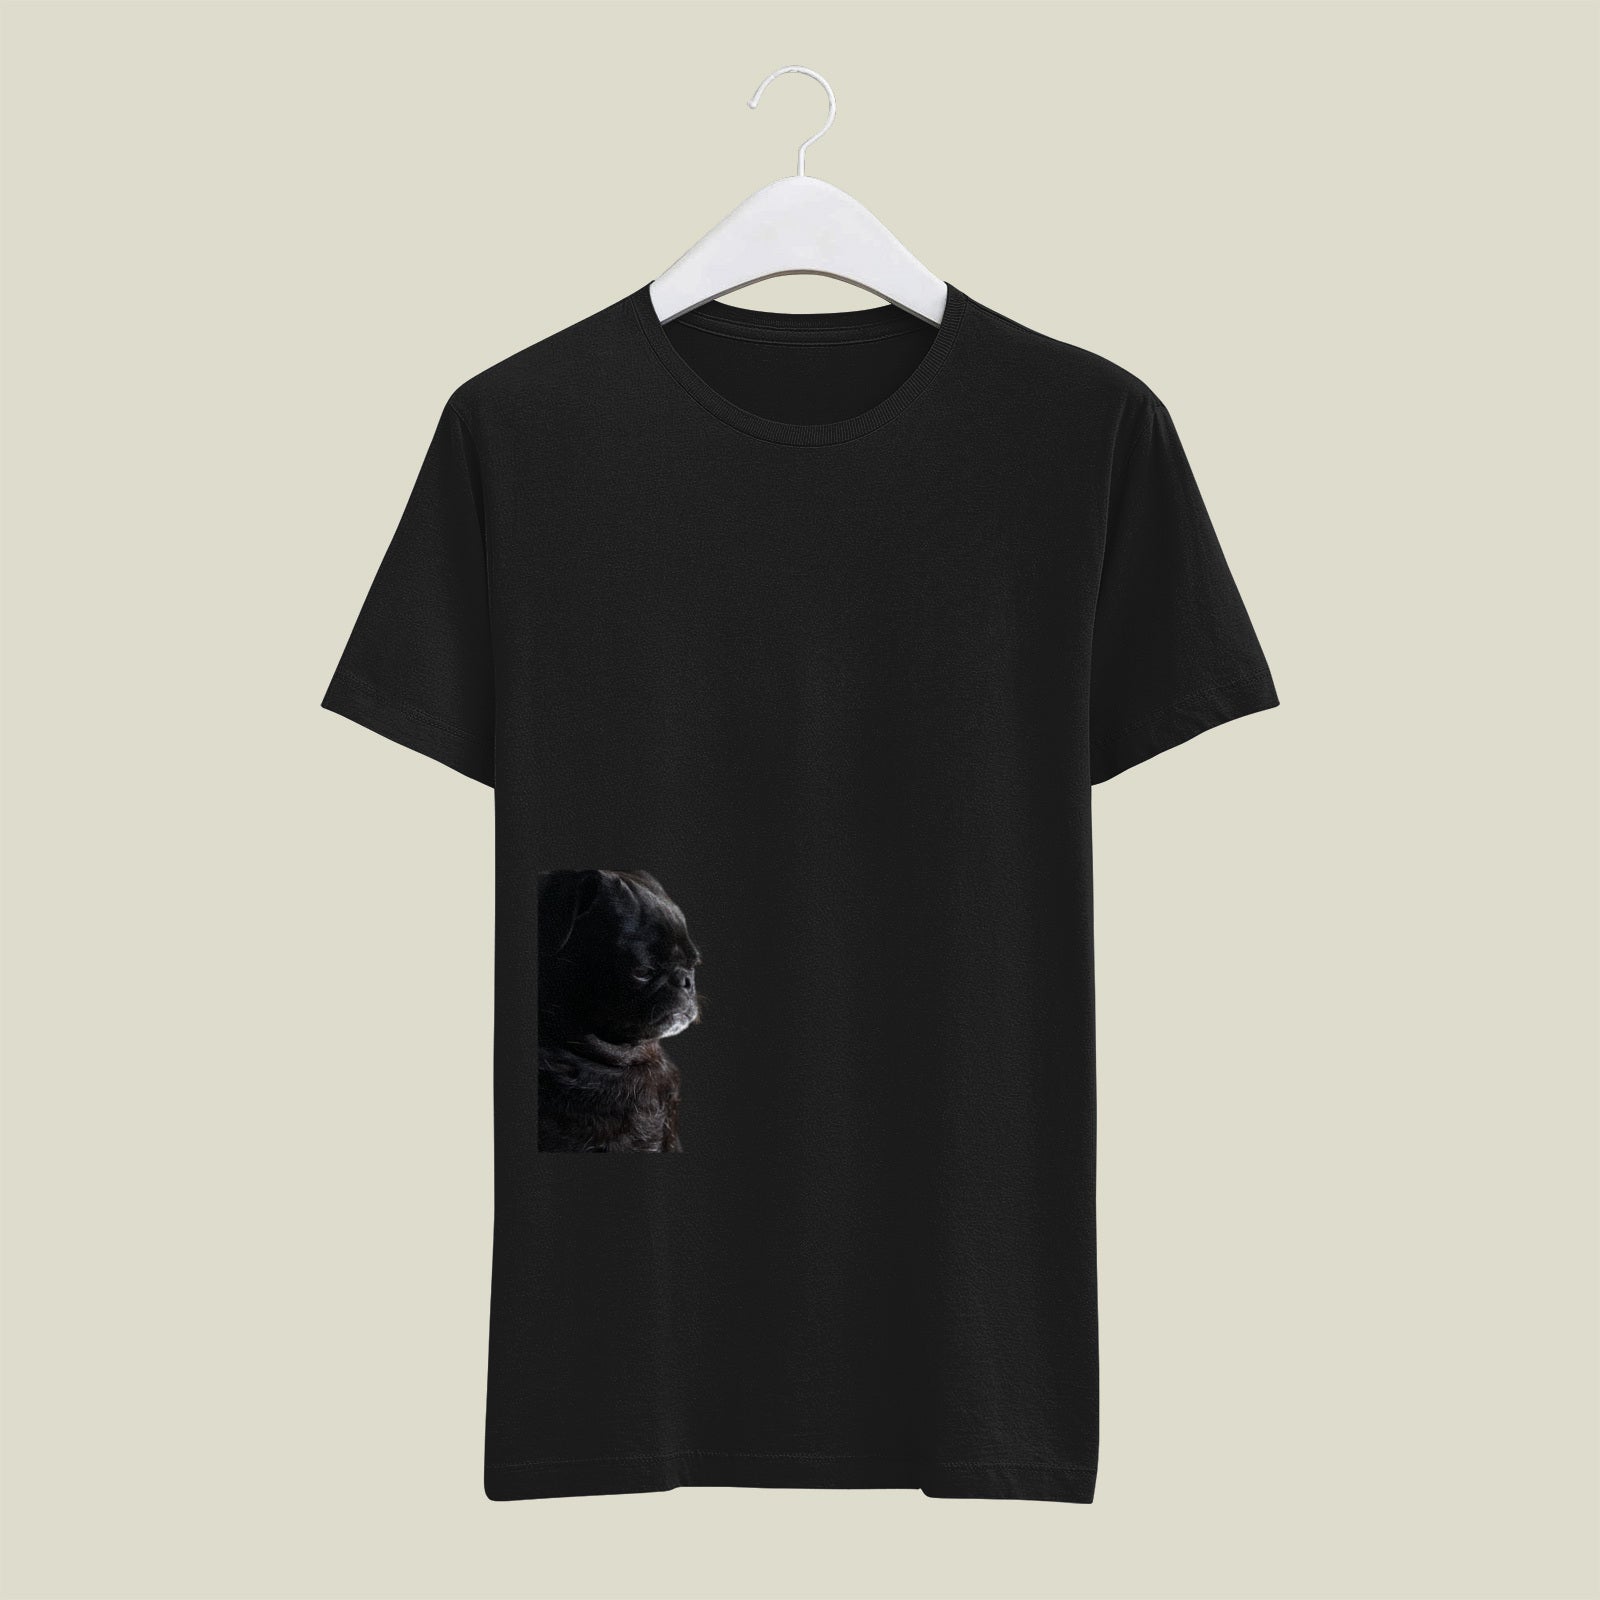 a black pug side profile picture on the bottom left of a tshirt